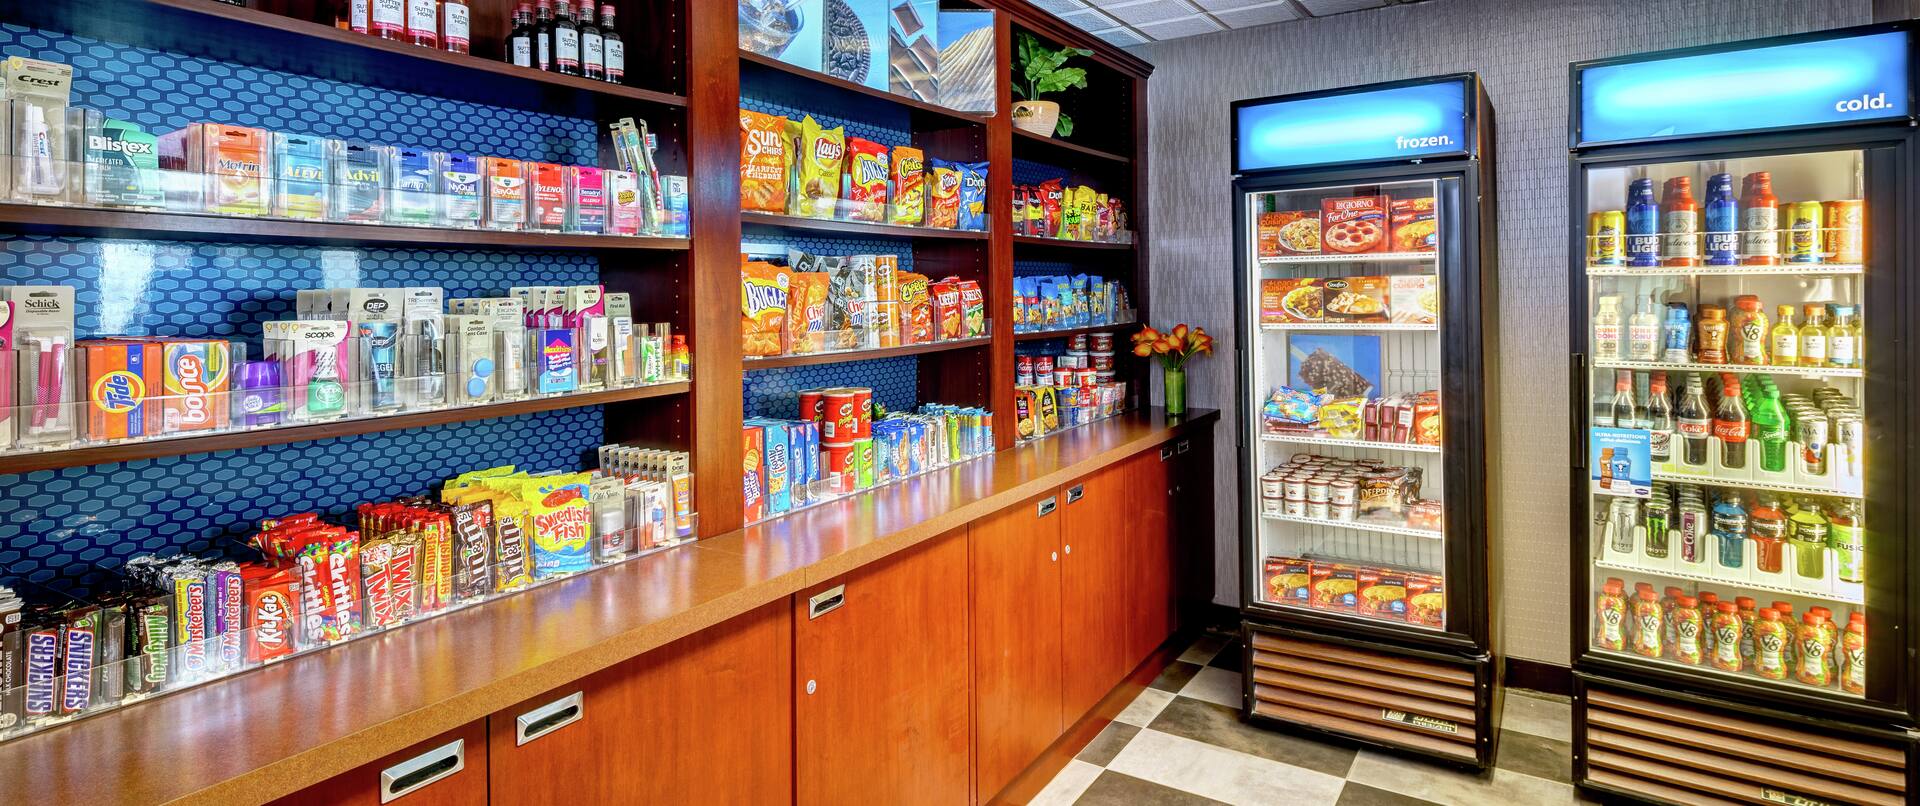 Snack Shop with Cold Drinks